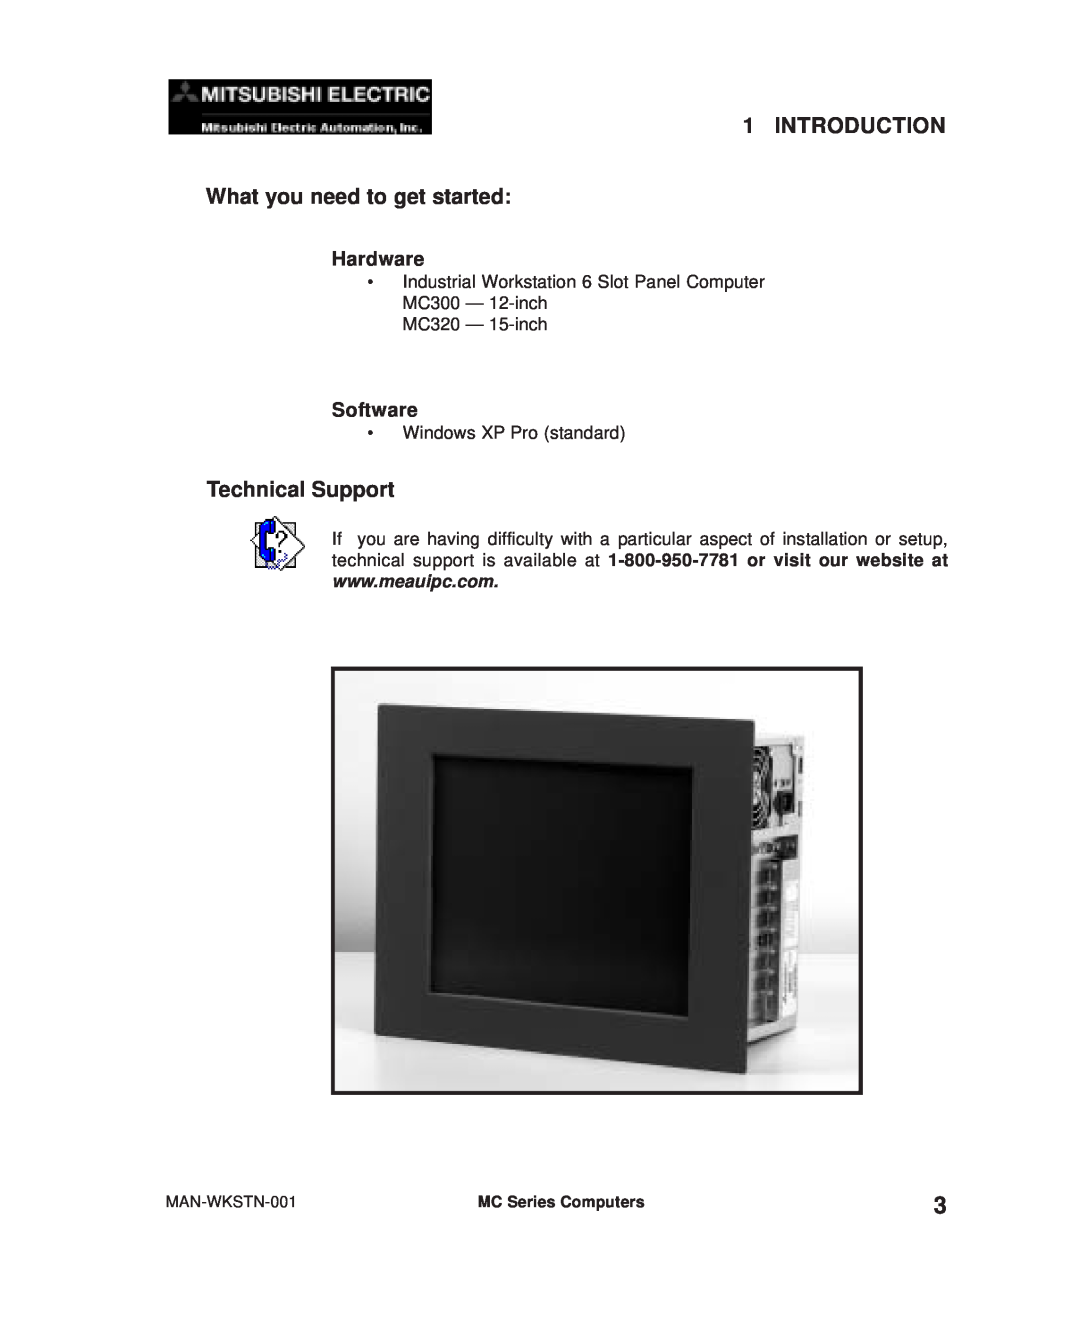 Mitsubishi Electronics MC300 manual INTRODUCTION What you need to get started, Technical Support, Hardware, Software 